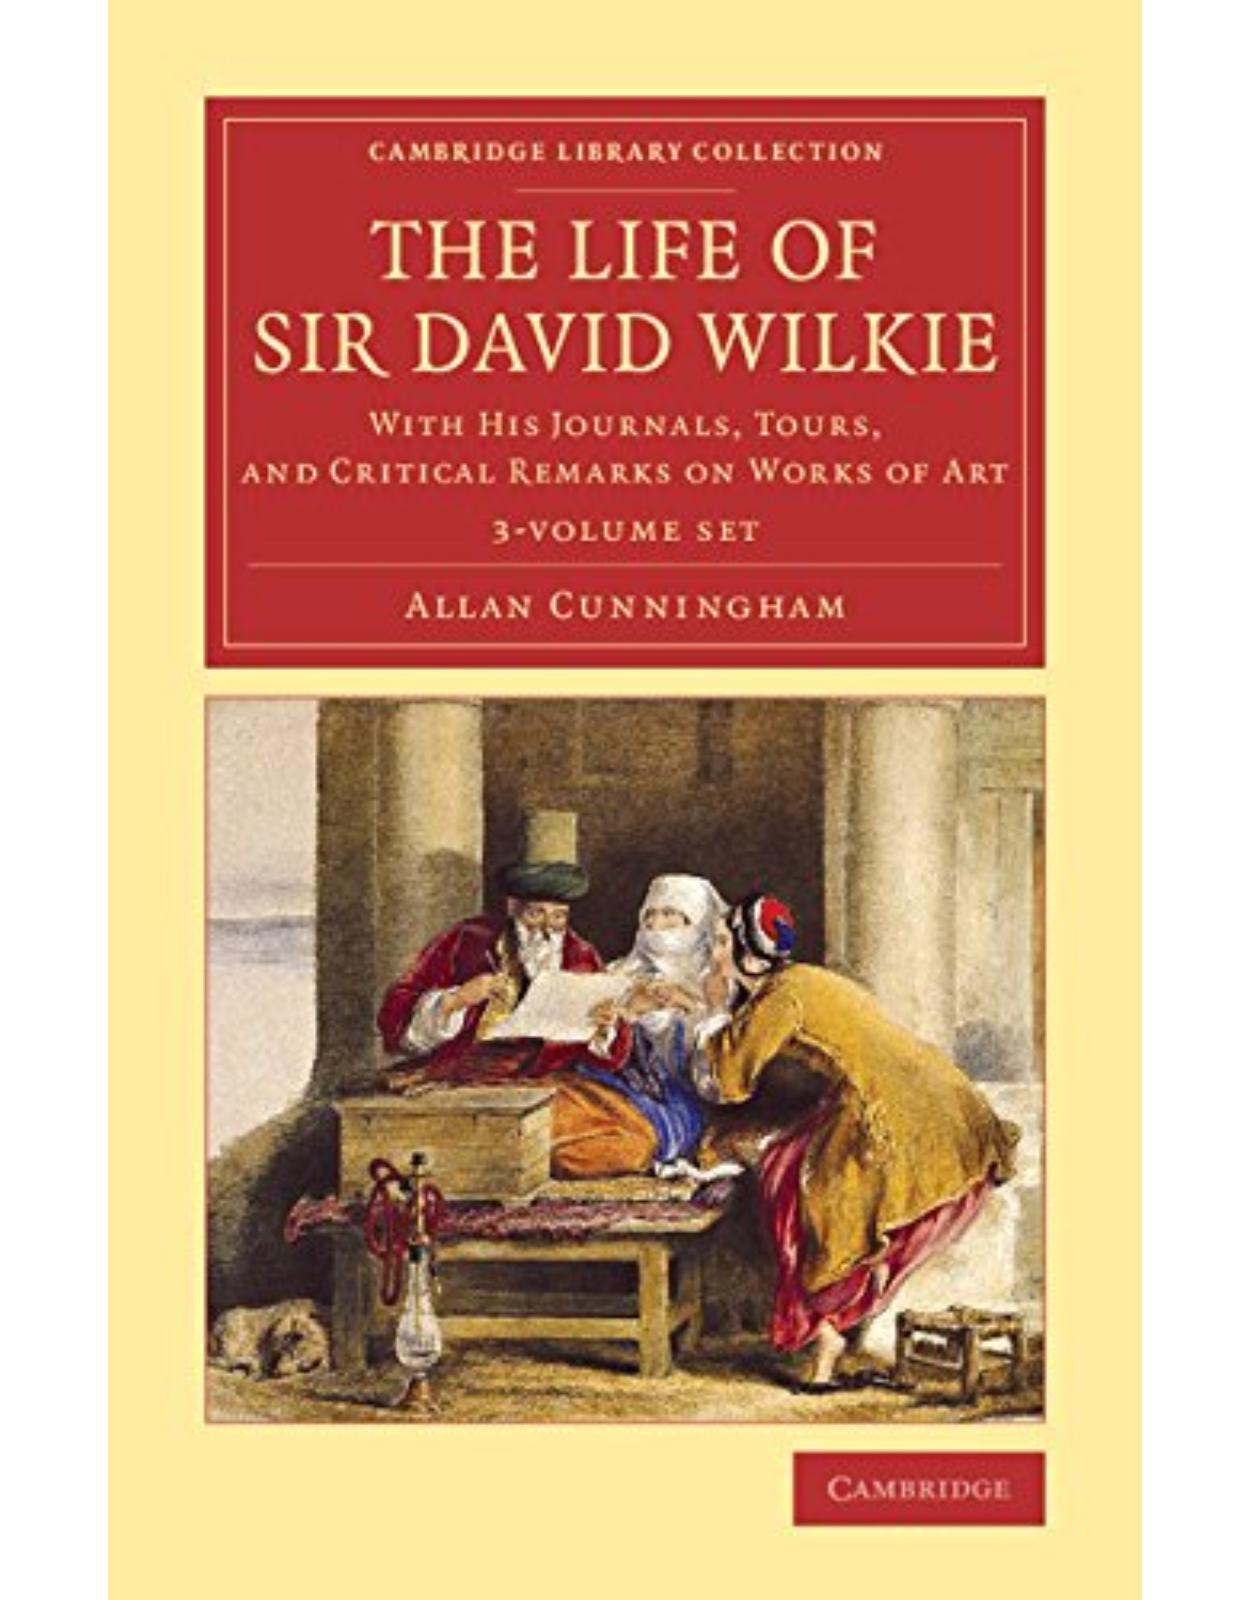 The Life of Sir David Wilkie 3 Volume Set: With his Journals, Tours, and Critical Remarks on Works of Art (Cambridge Library Collection - Art and Architecture)